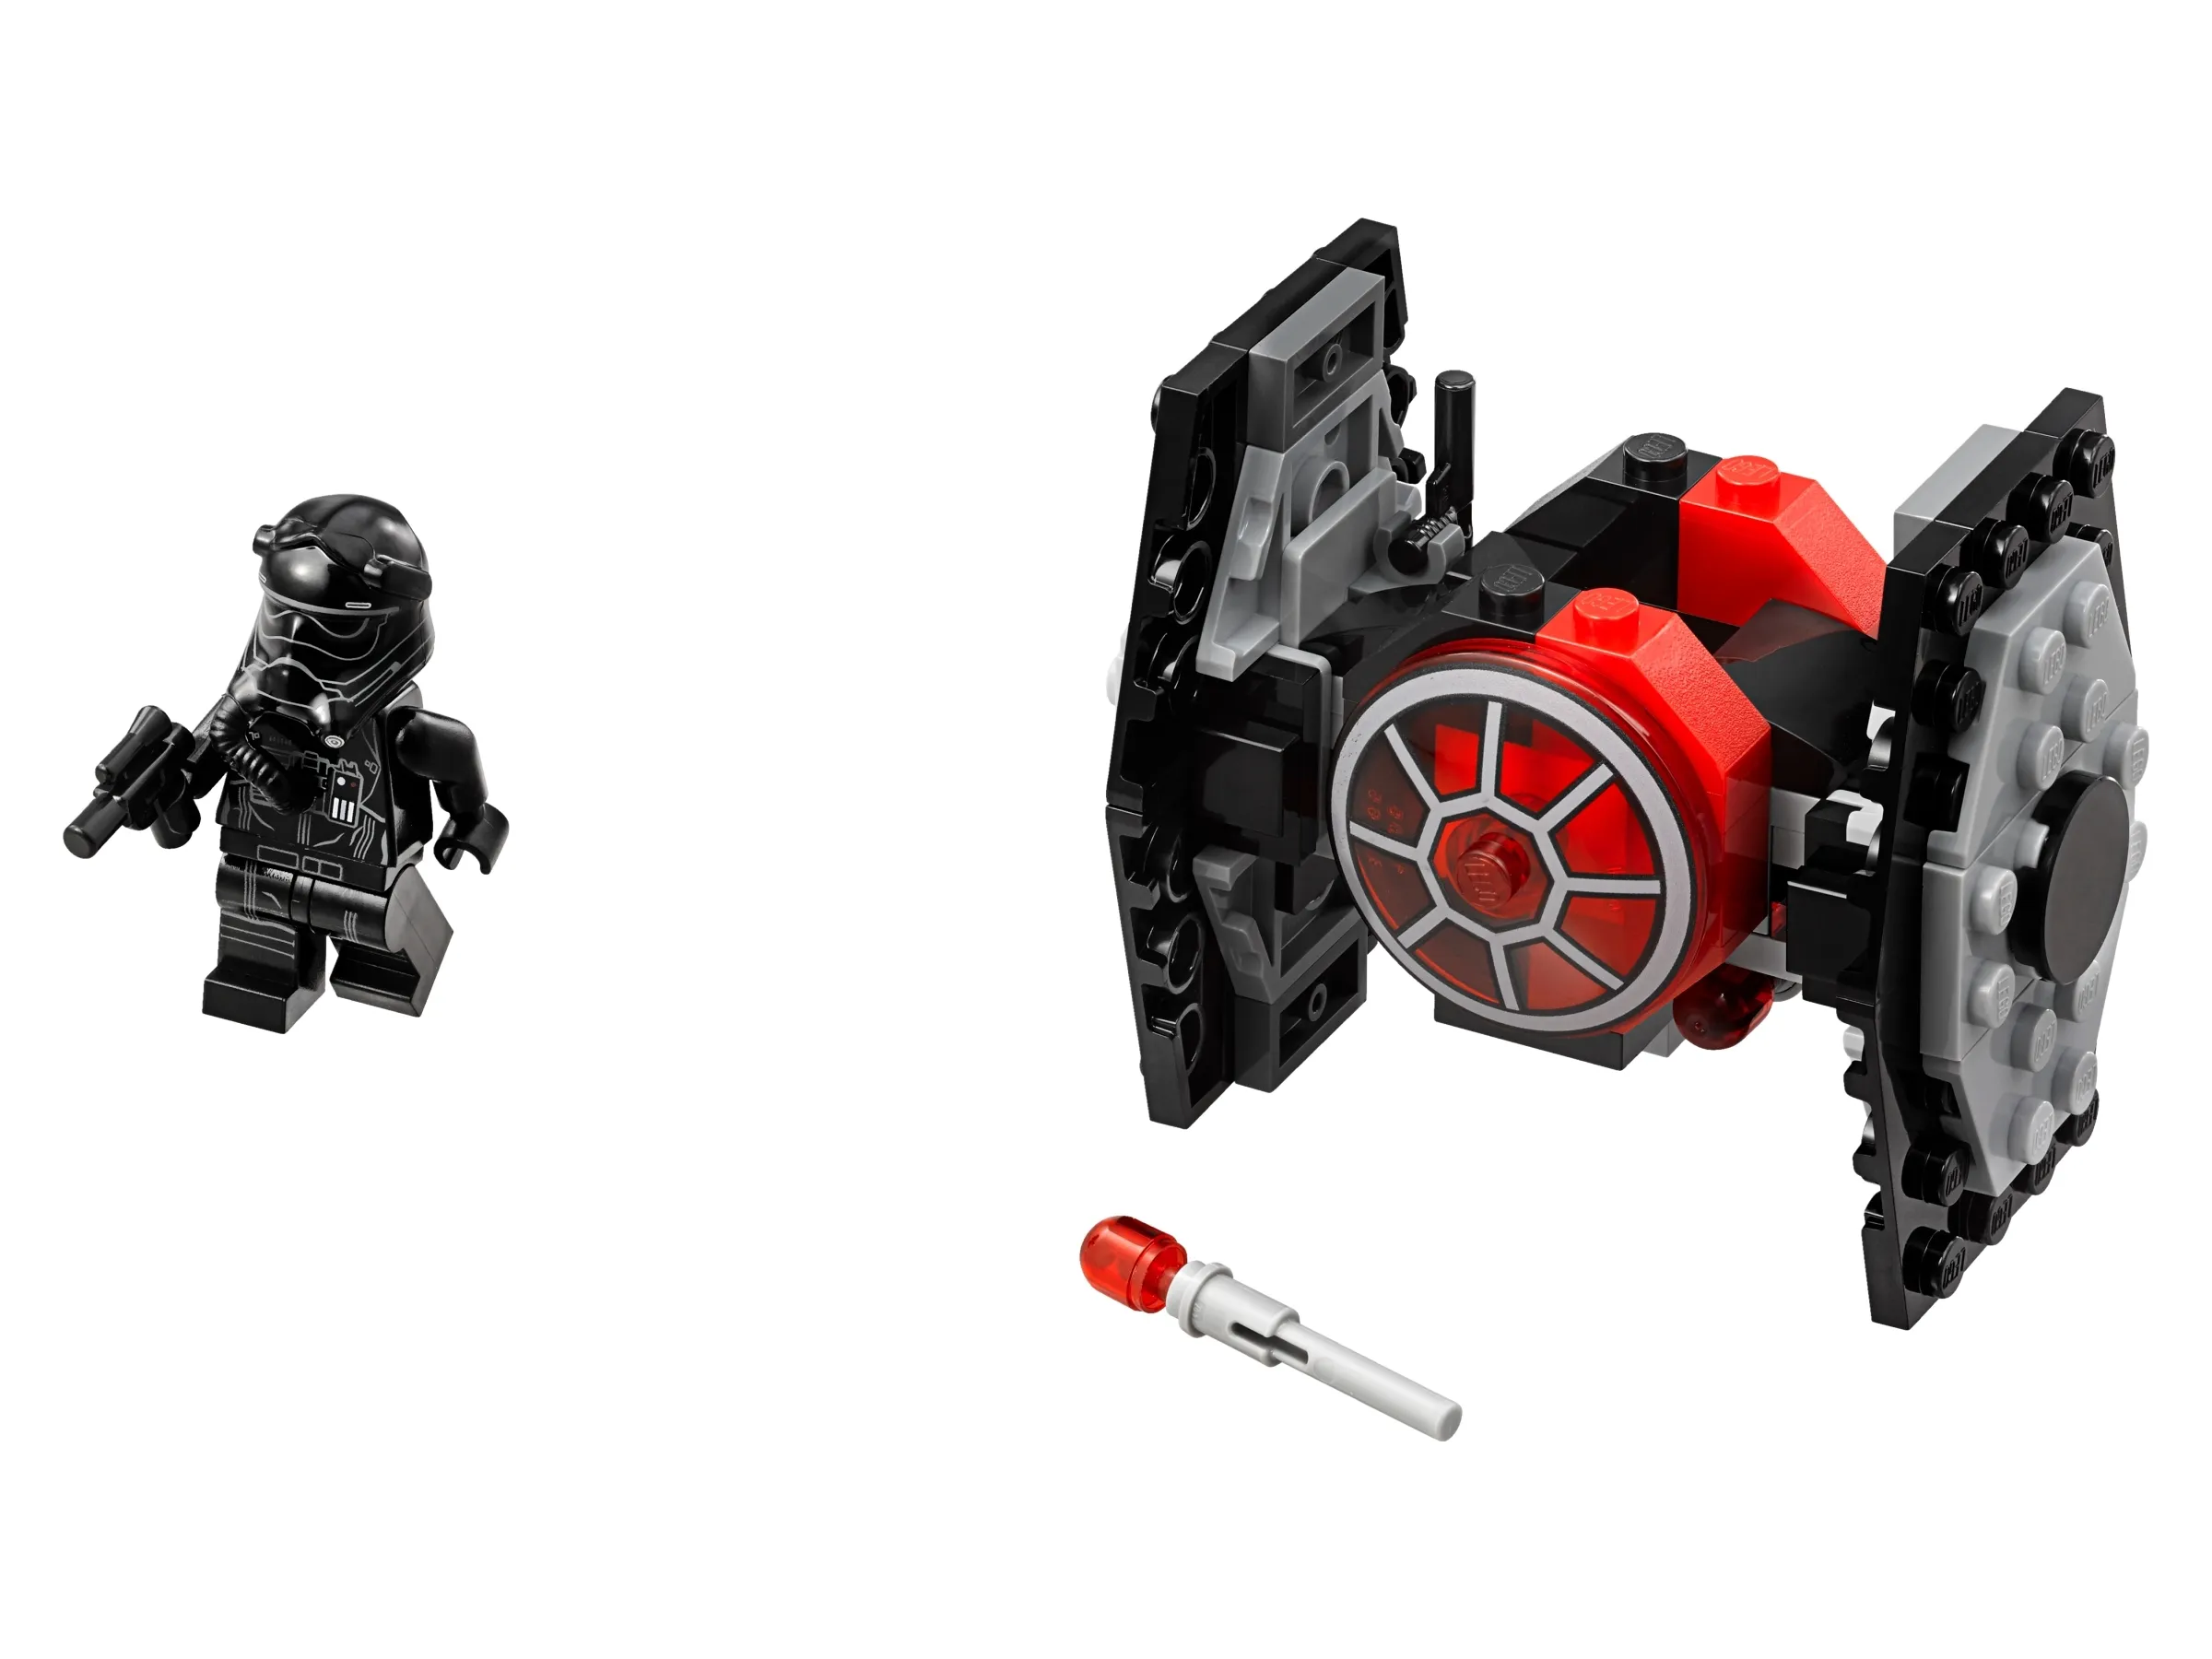 LEGO Star Wars First Order TIE Fighter Microfighter